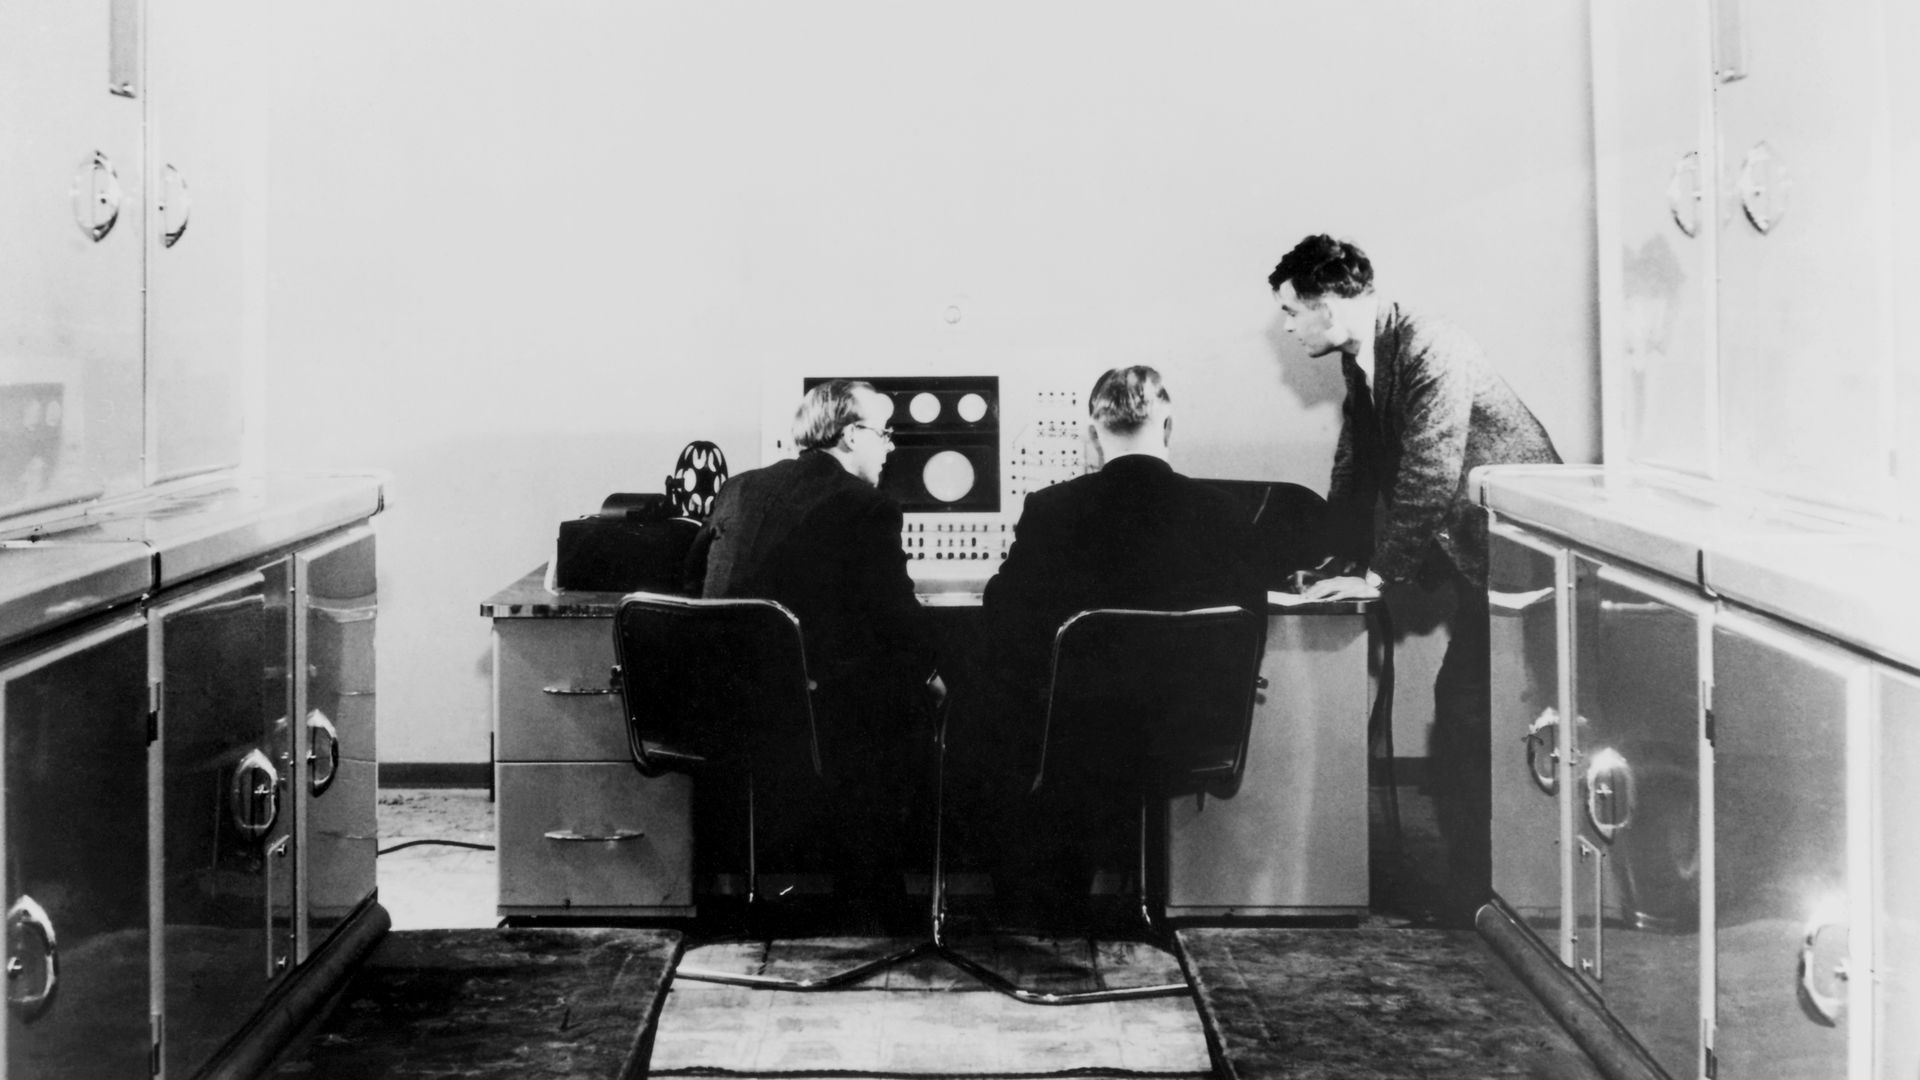 Alan Turing and colleagues working on the Ferranti Mark I Computer, 1951.